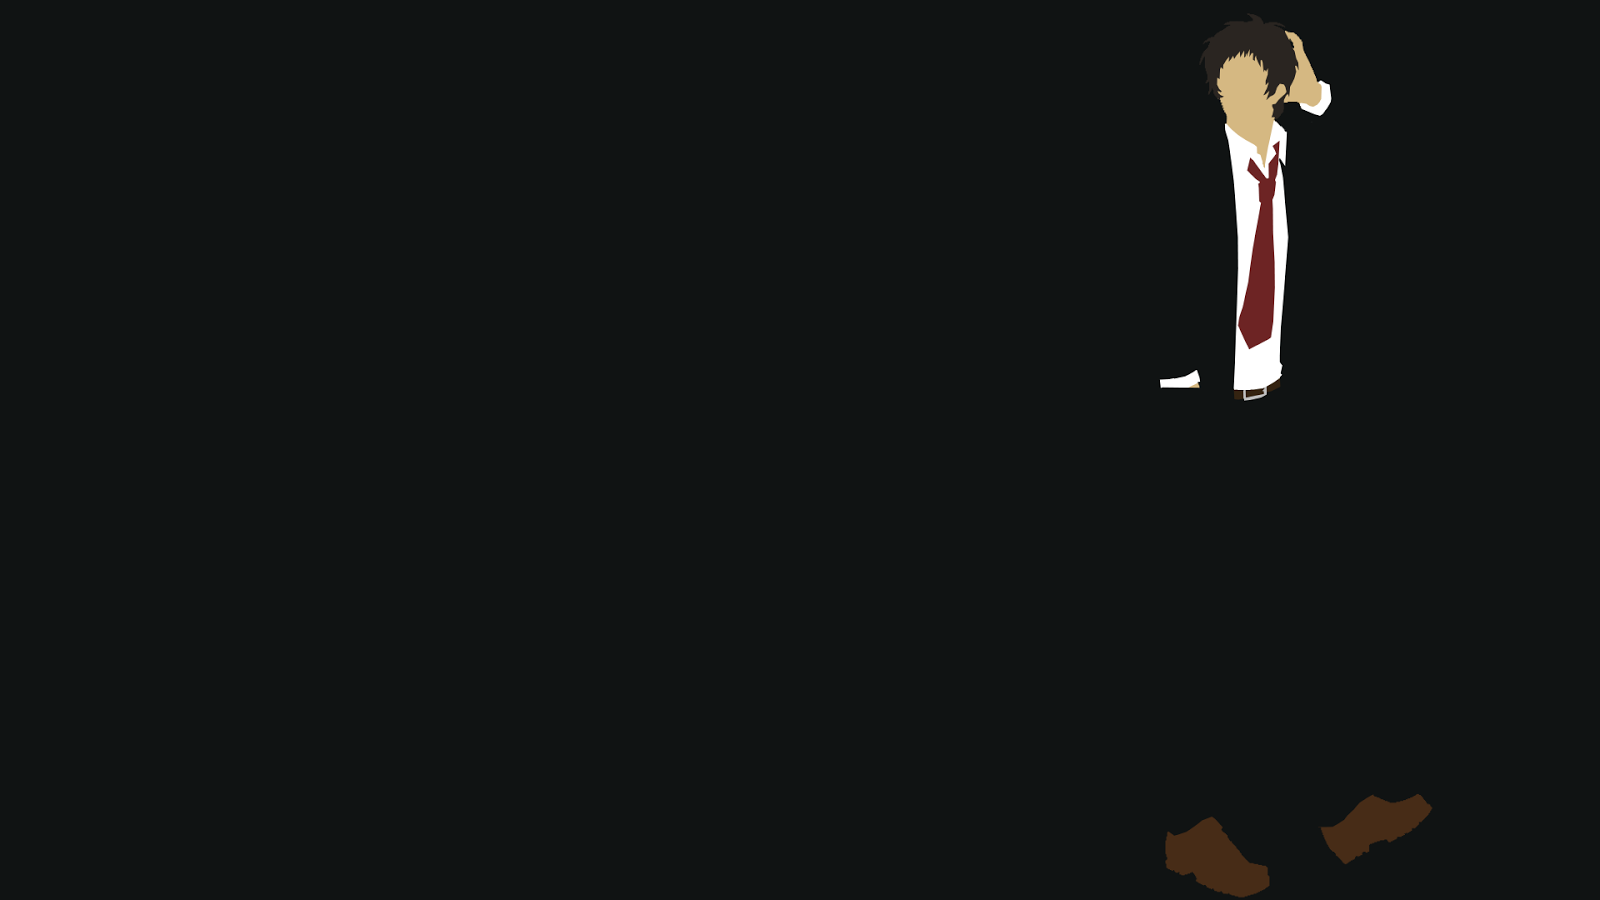 Here S A Wallpaper Of Tohru Adachi From Persona He Is Definitely